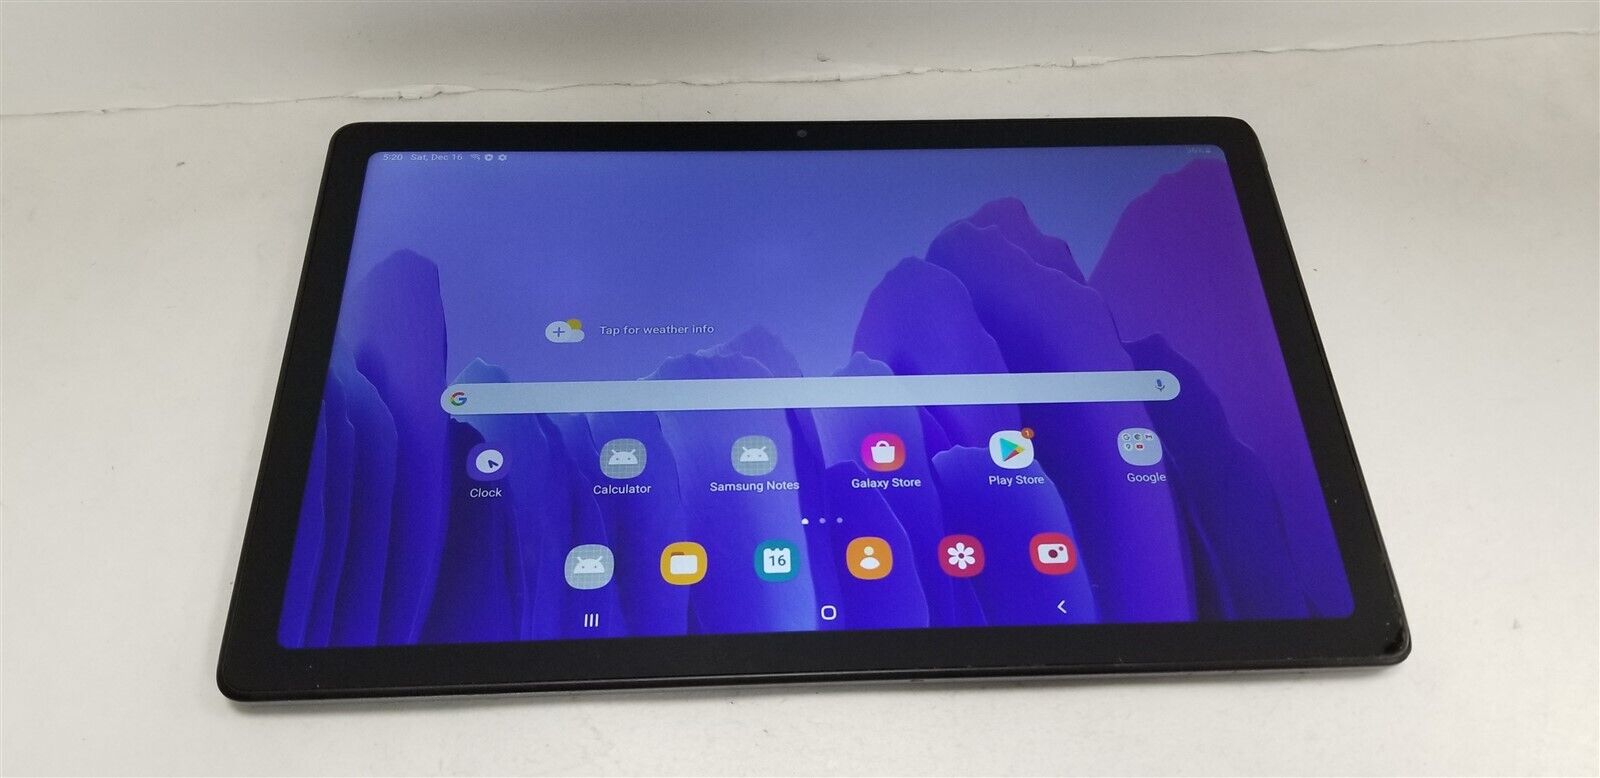 Samsung Galaxy Tab A7 64gb Black 10.4in SM-T500 (WIFI Only) Reduced Price NW1240